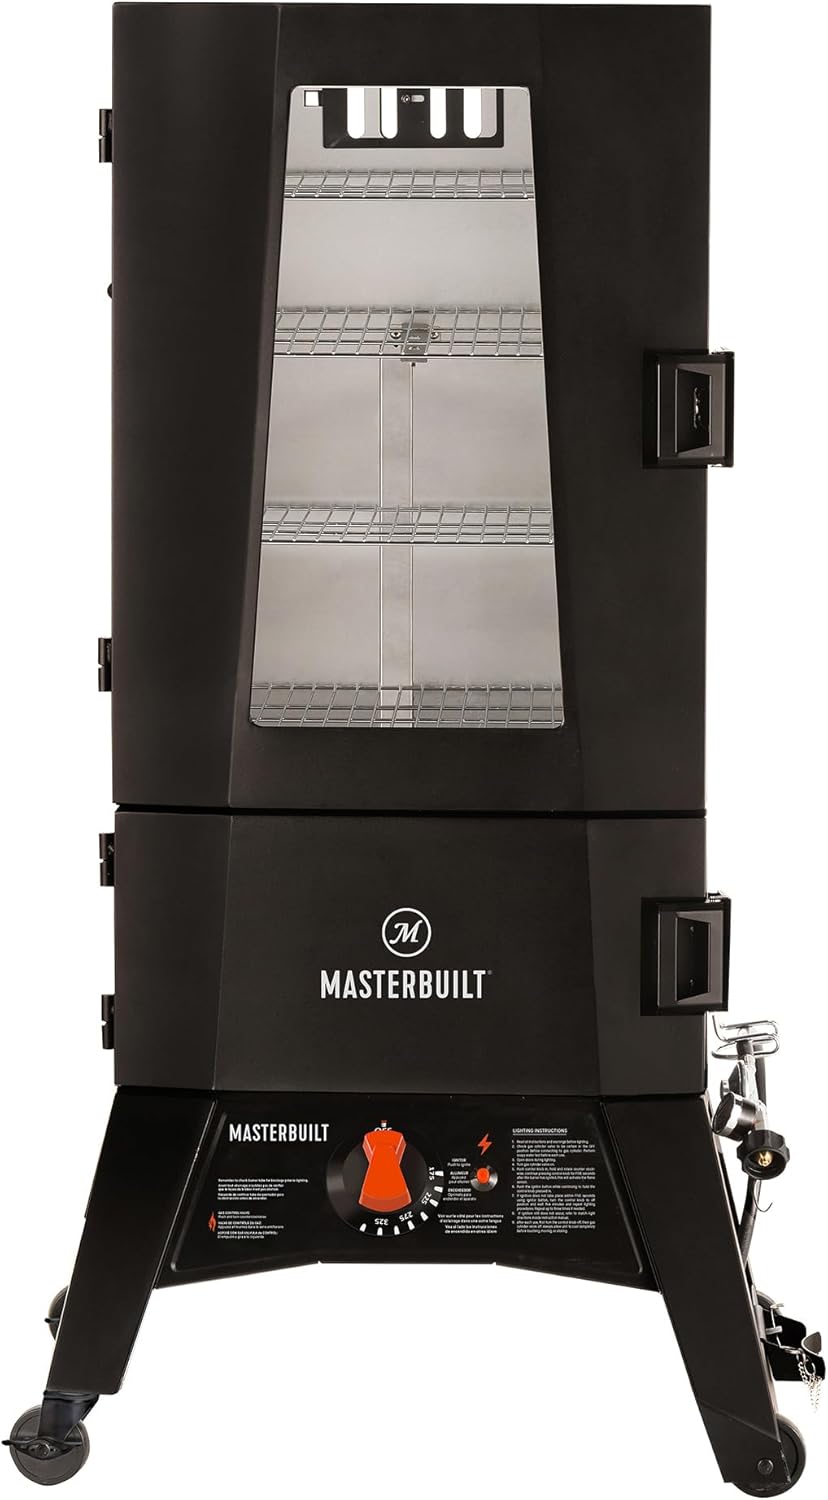 Masterbuilt 40-inch ThermoTemp Propane Smoker Review